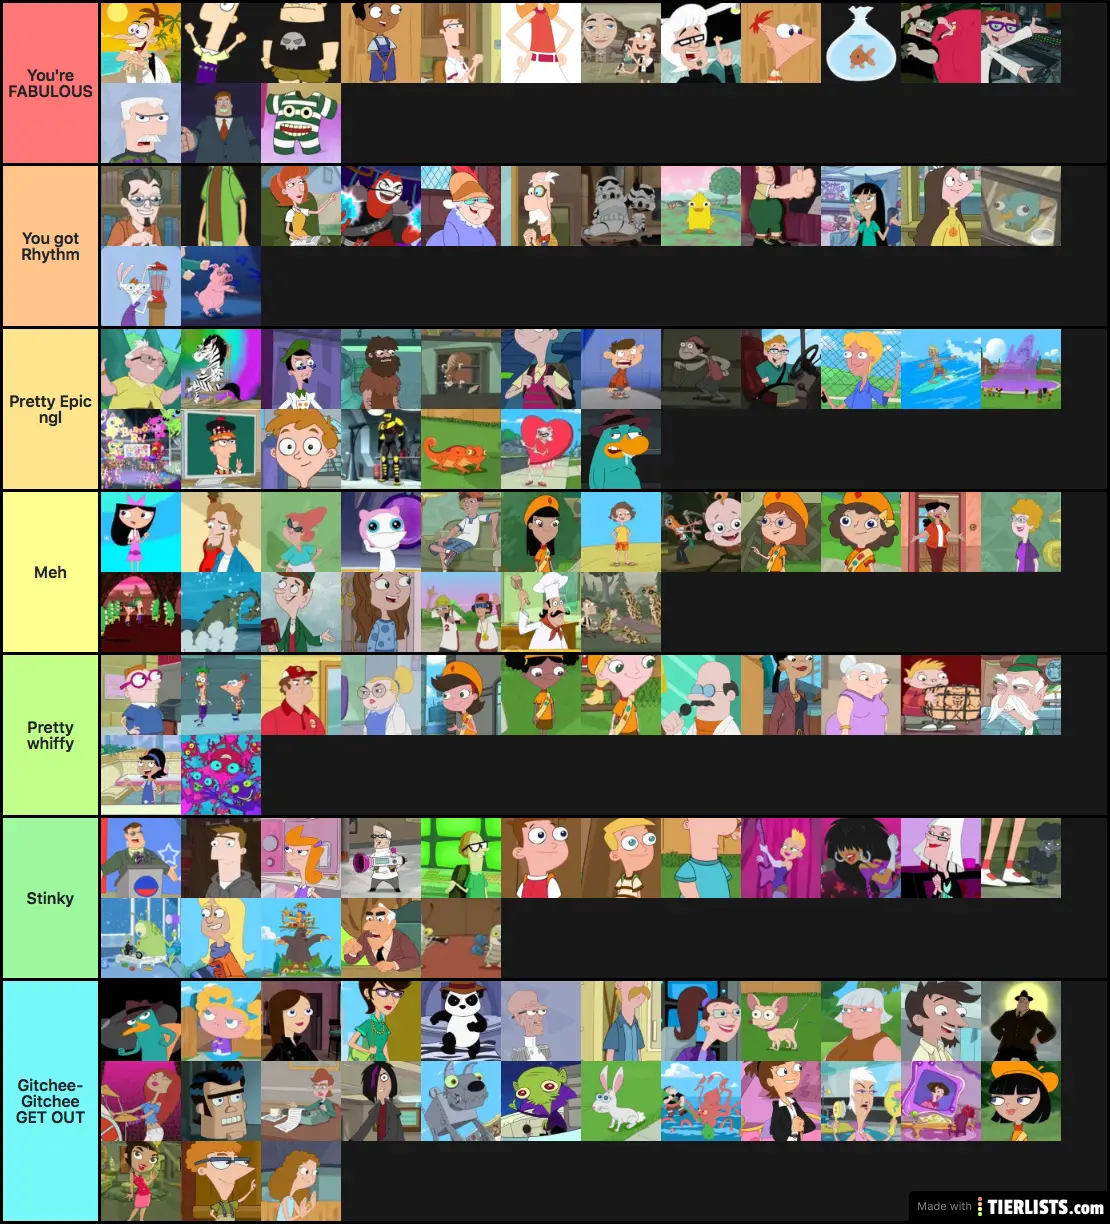 Ferb phineas characters and